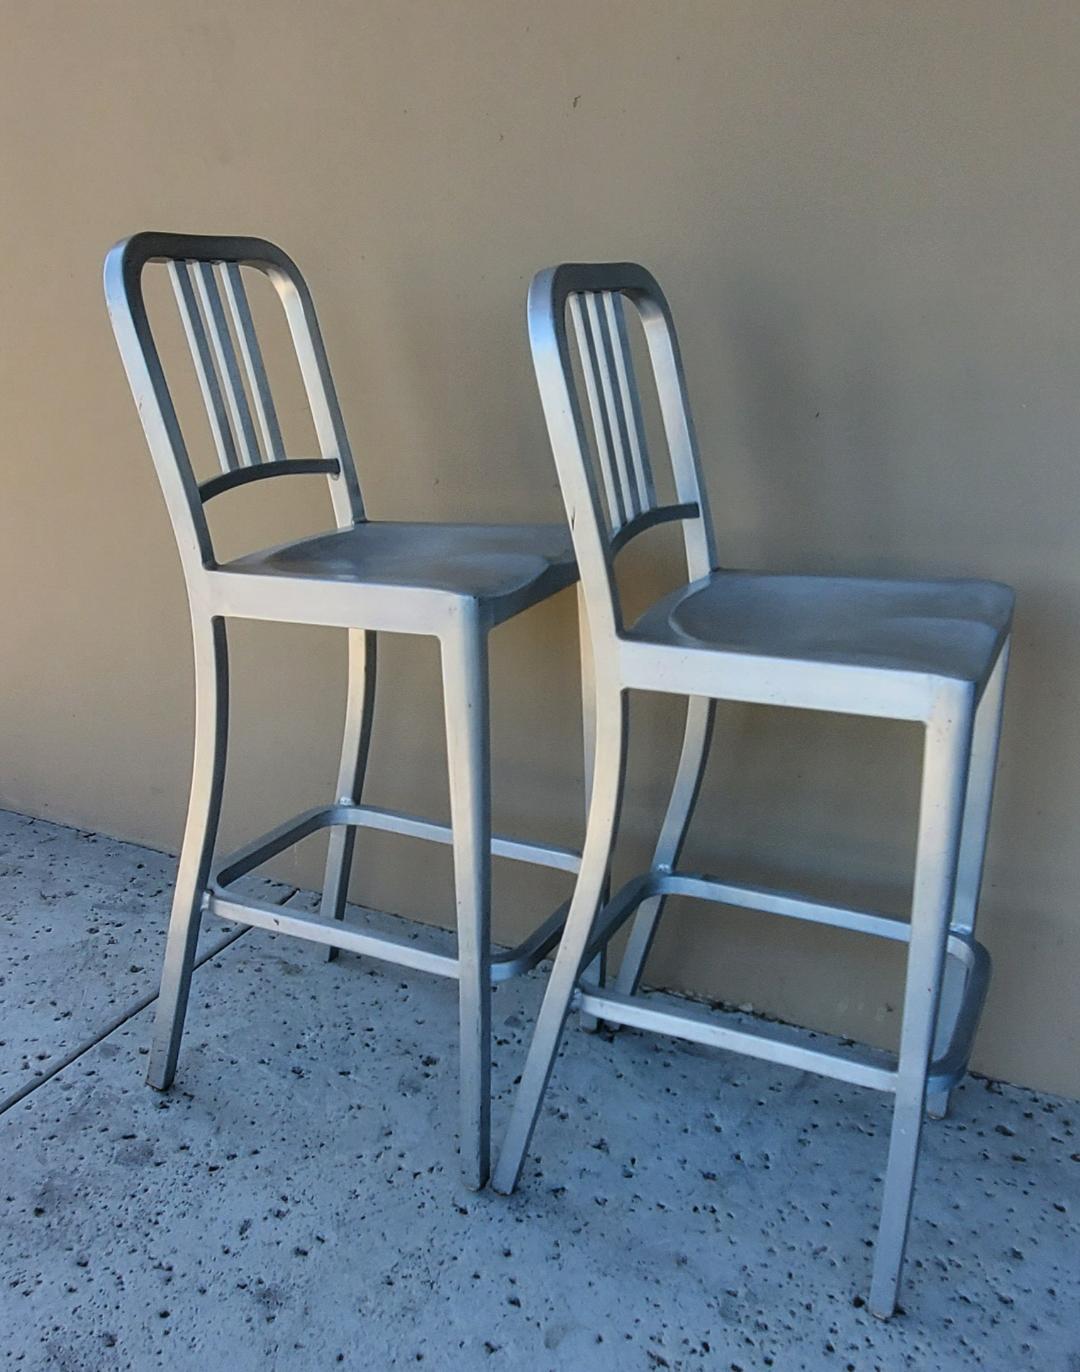 2 Bar Stools Tall Brushed Aluminum Indoor Outdoor EMECO Barstools Labeled For Sale 1